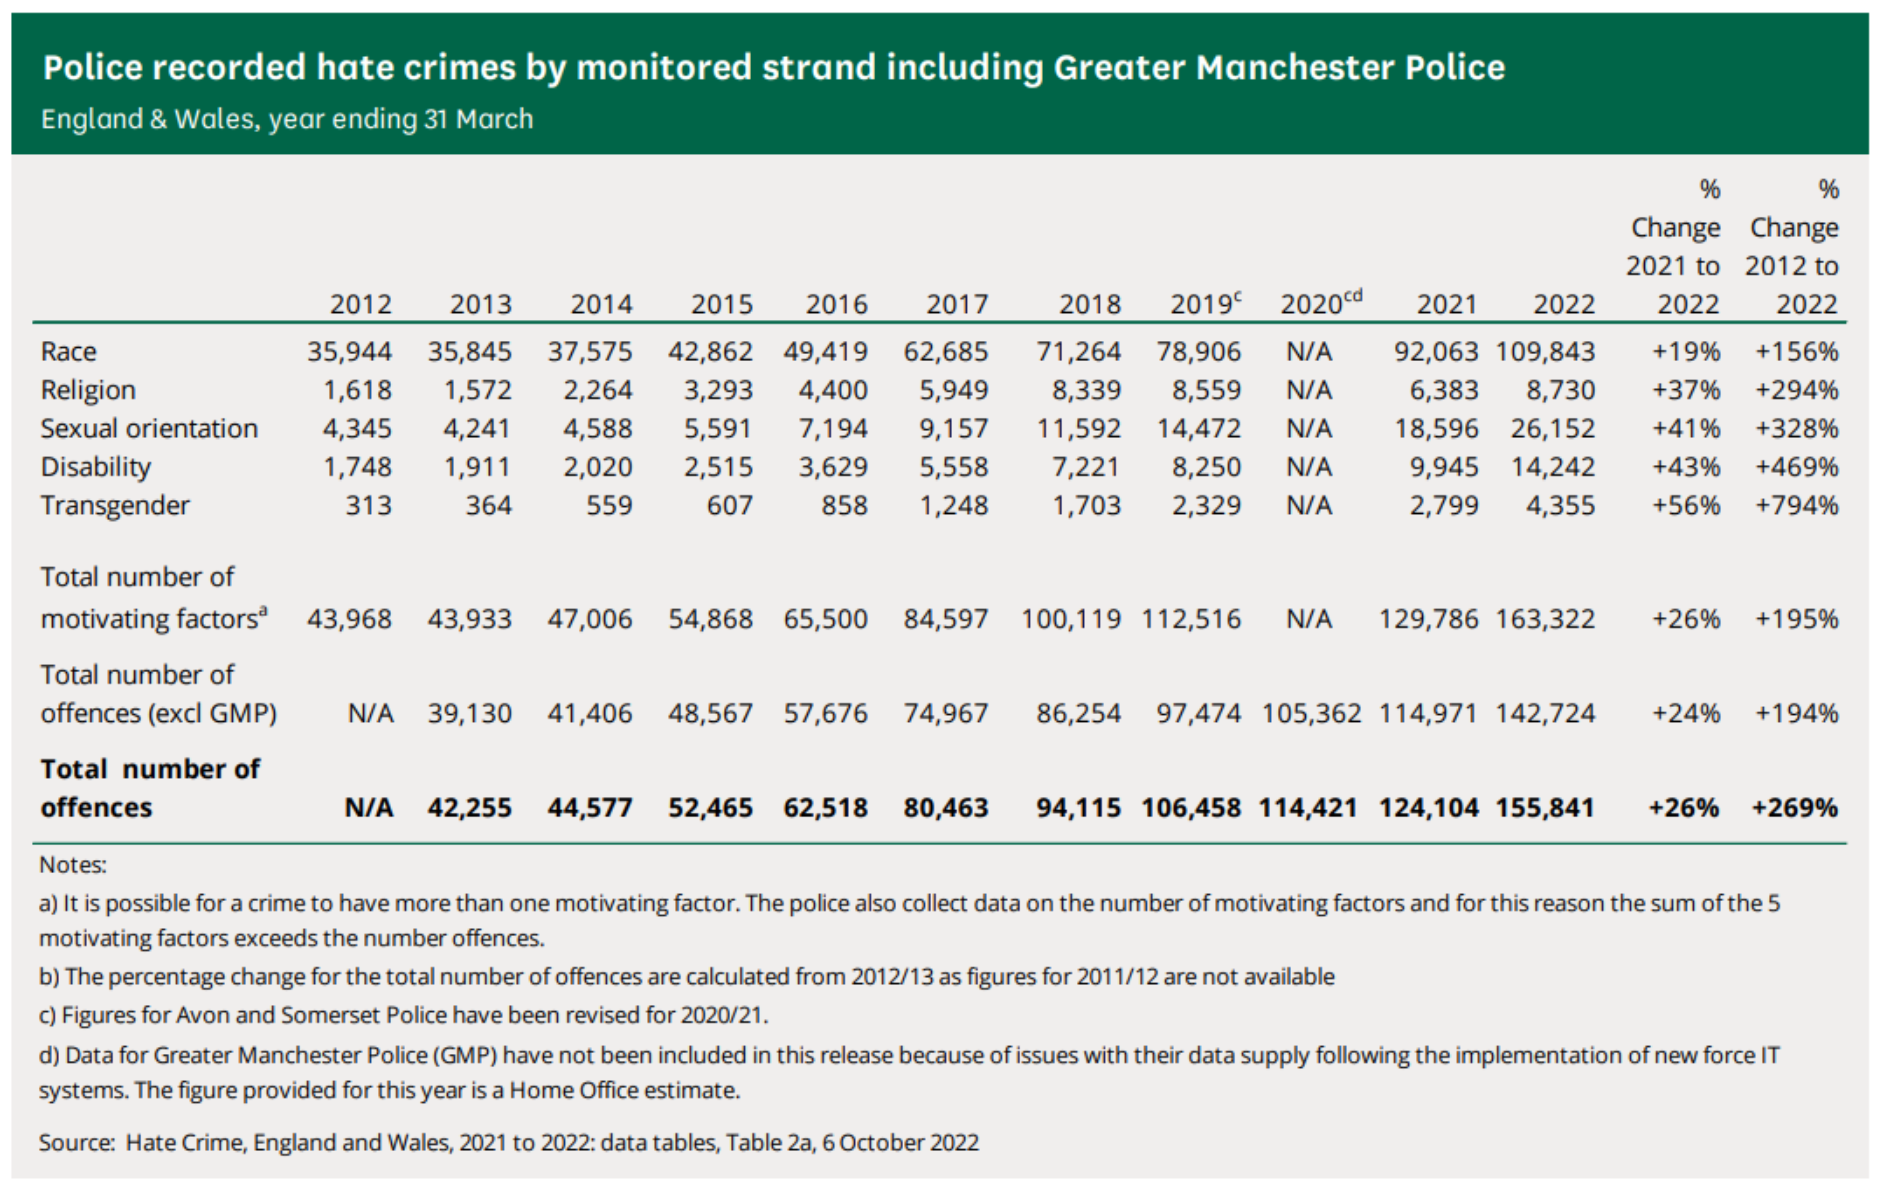 Table of statistics showing rates of hate crimes over the years from 2012 to 2022